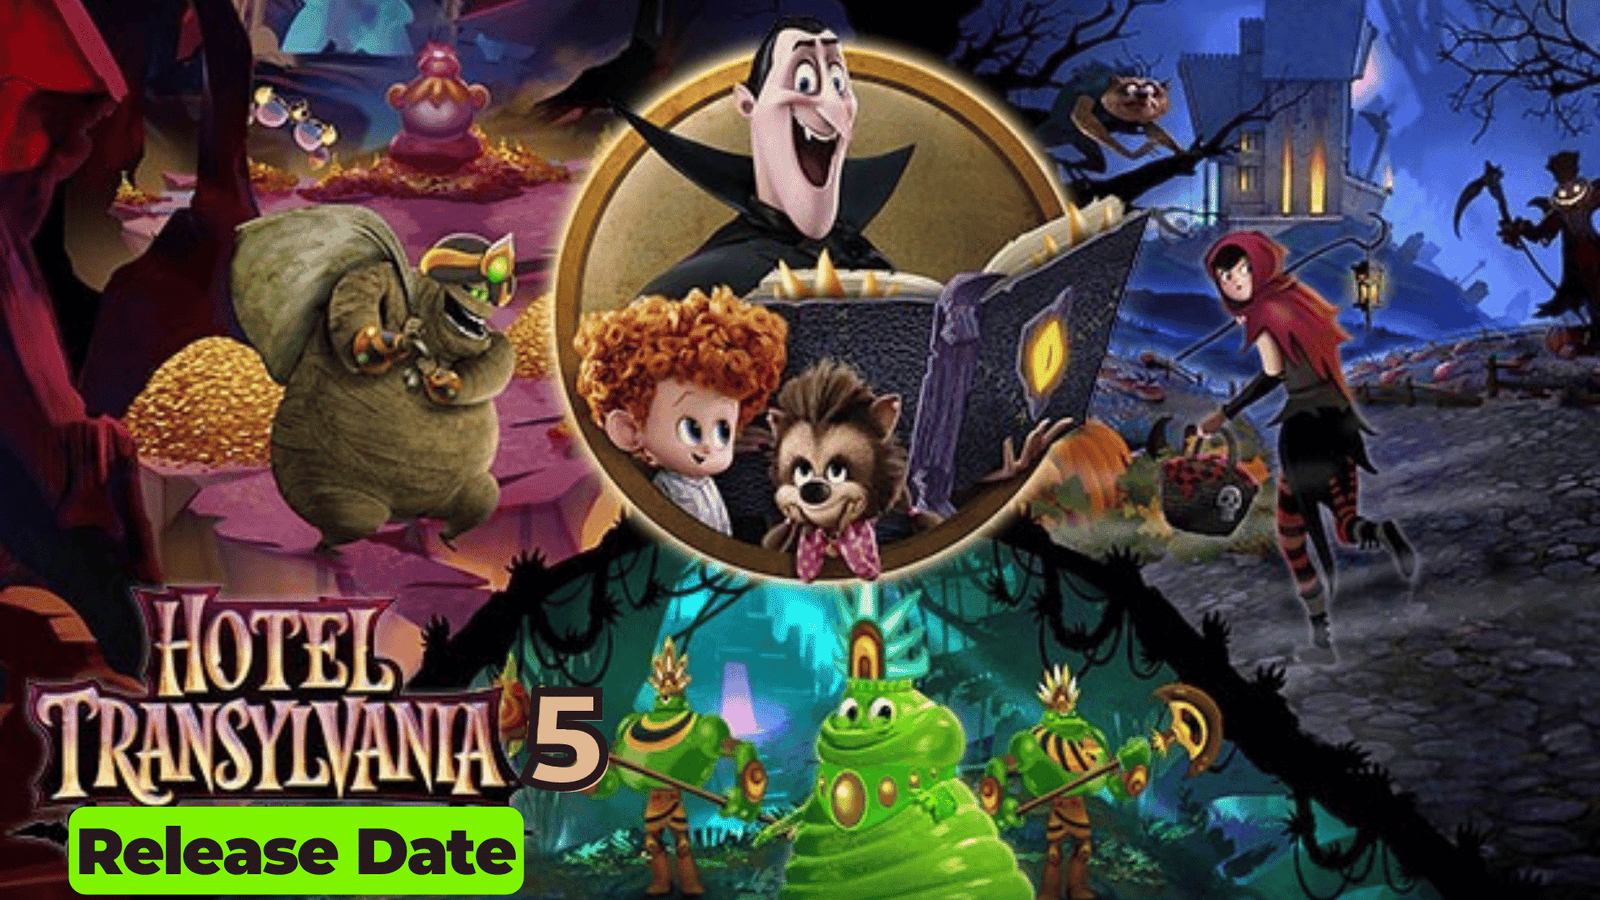 Hotel Transylvania 5 Release Date, Trailer - Will there be another Sequel?